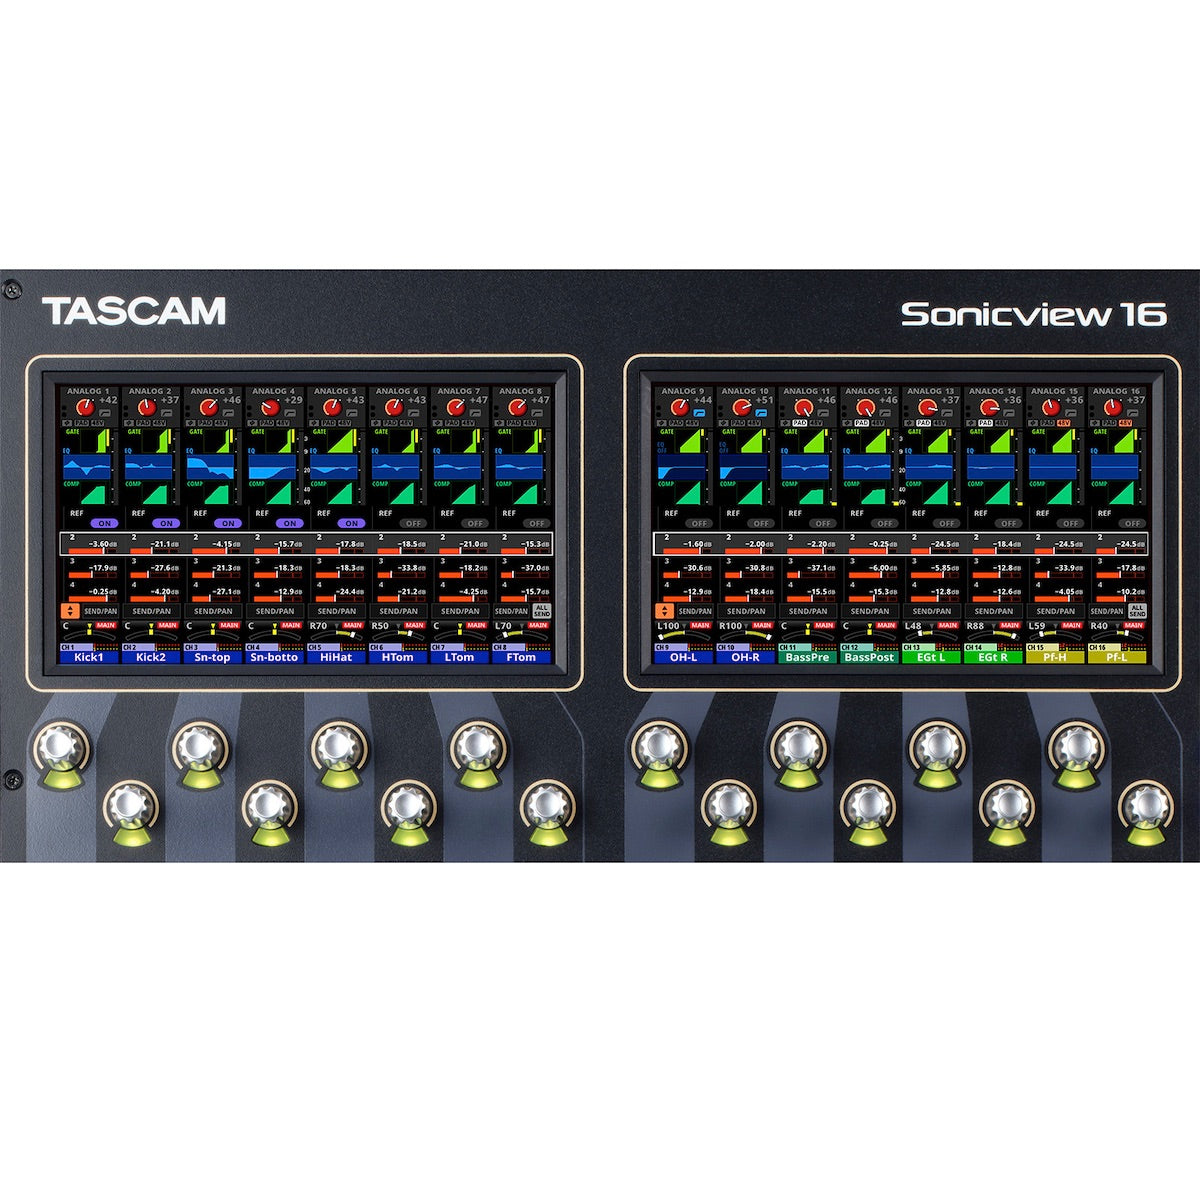 TASCAM Sonicview 16XP - 16-input Digital Recording and Mixing Console, channel strip view